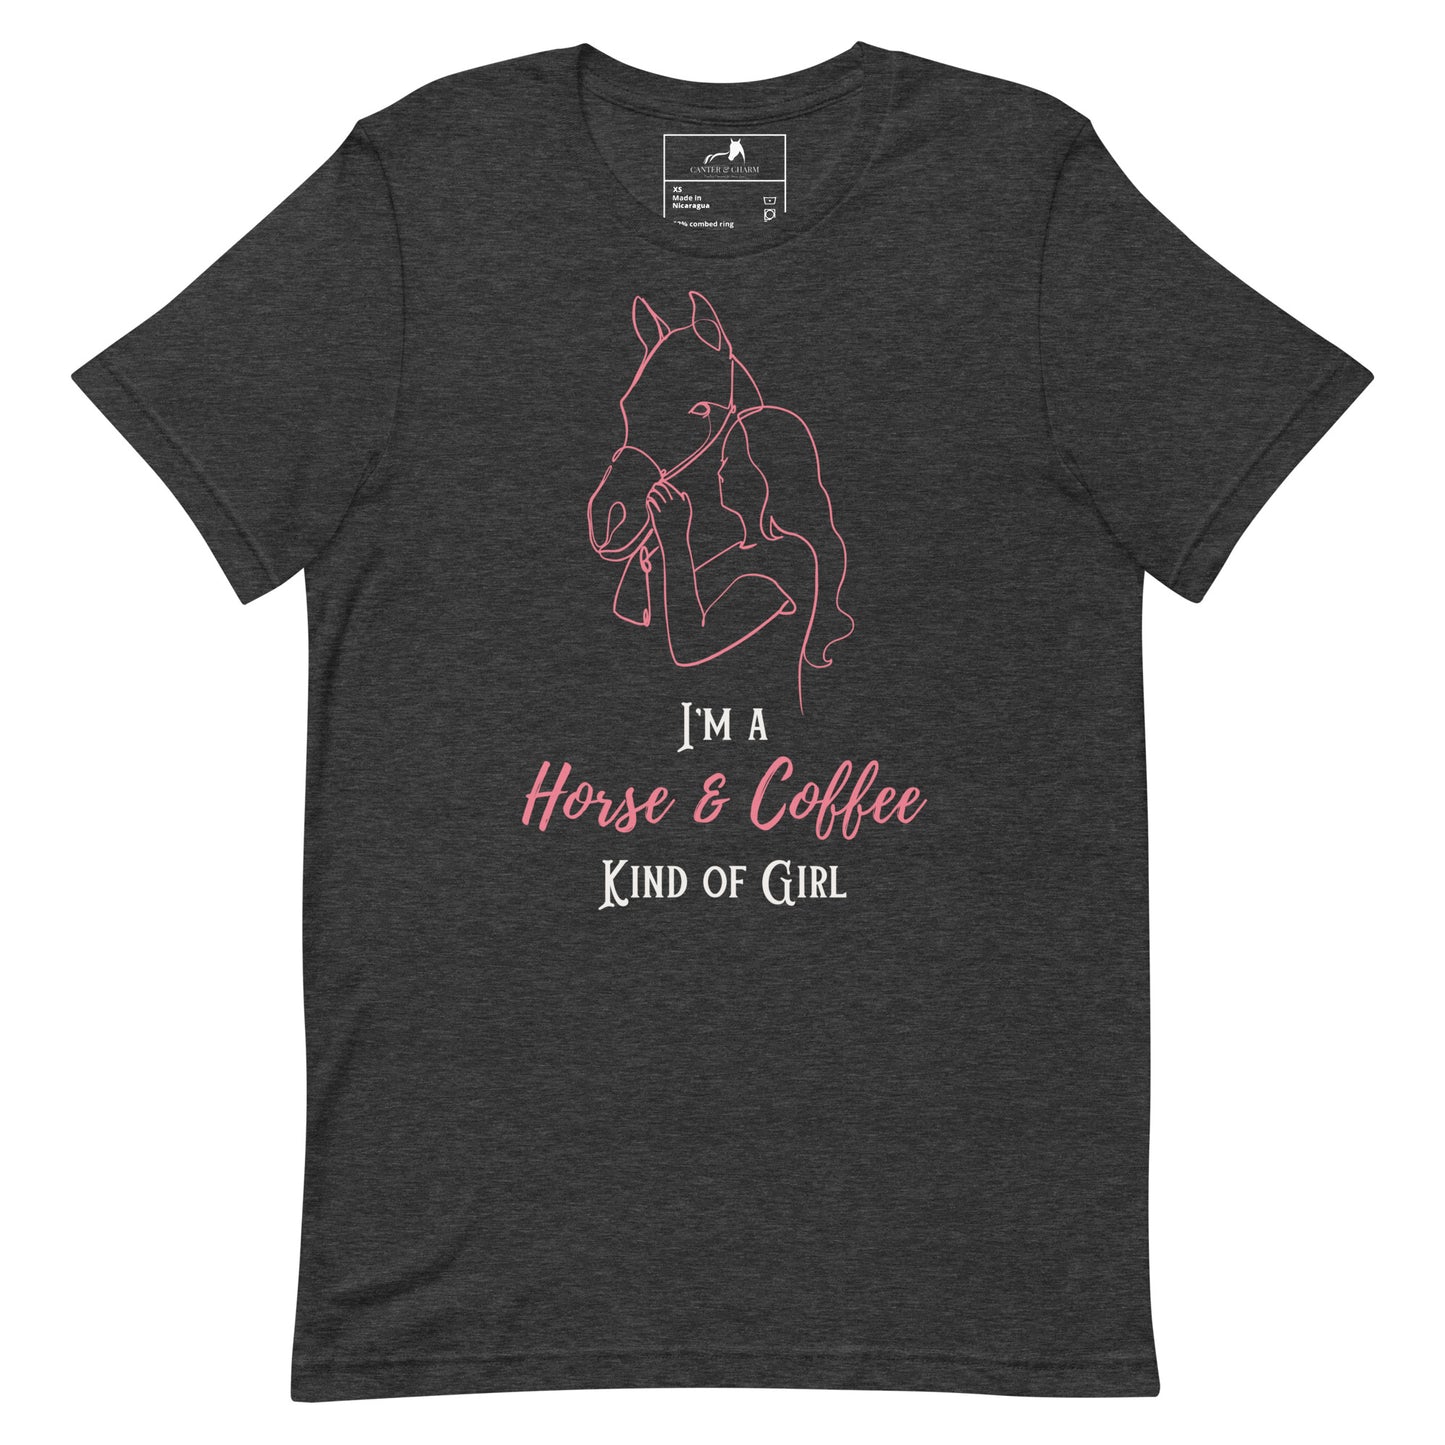 Horse & Coffee Kind of Girl Tee - Adult Crew Neck - Equestrian Apparel - Horse Lover Gift - Pink Line Drawing - Equine Fashion